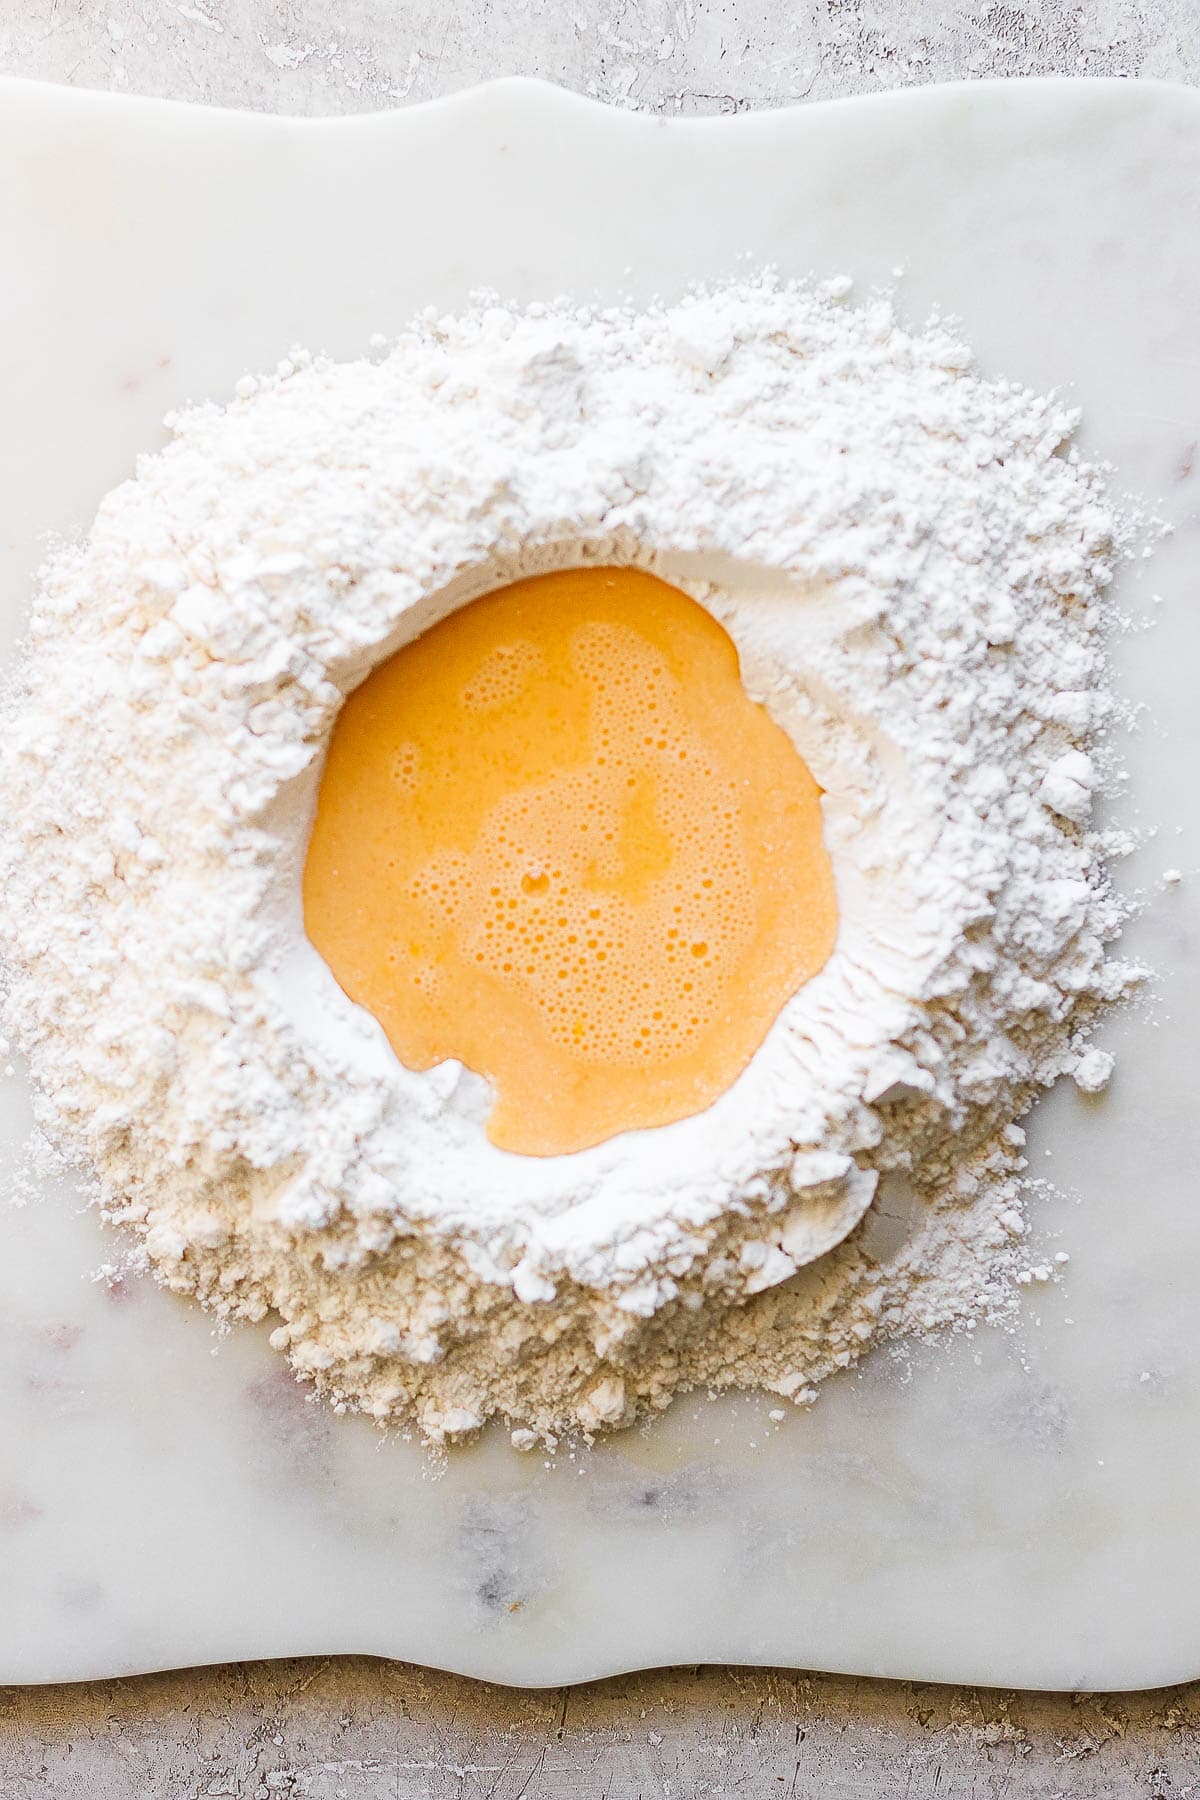 The flour and salt mixture is poured on a clean surface with the egg mixture poured in the middle.